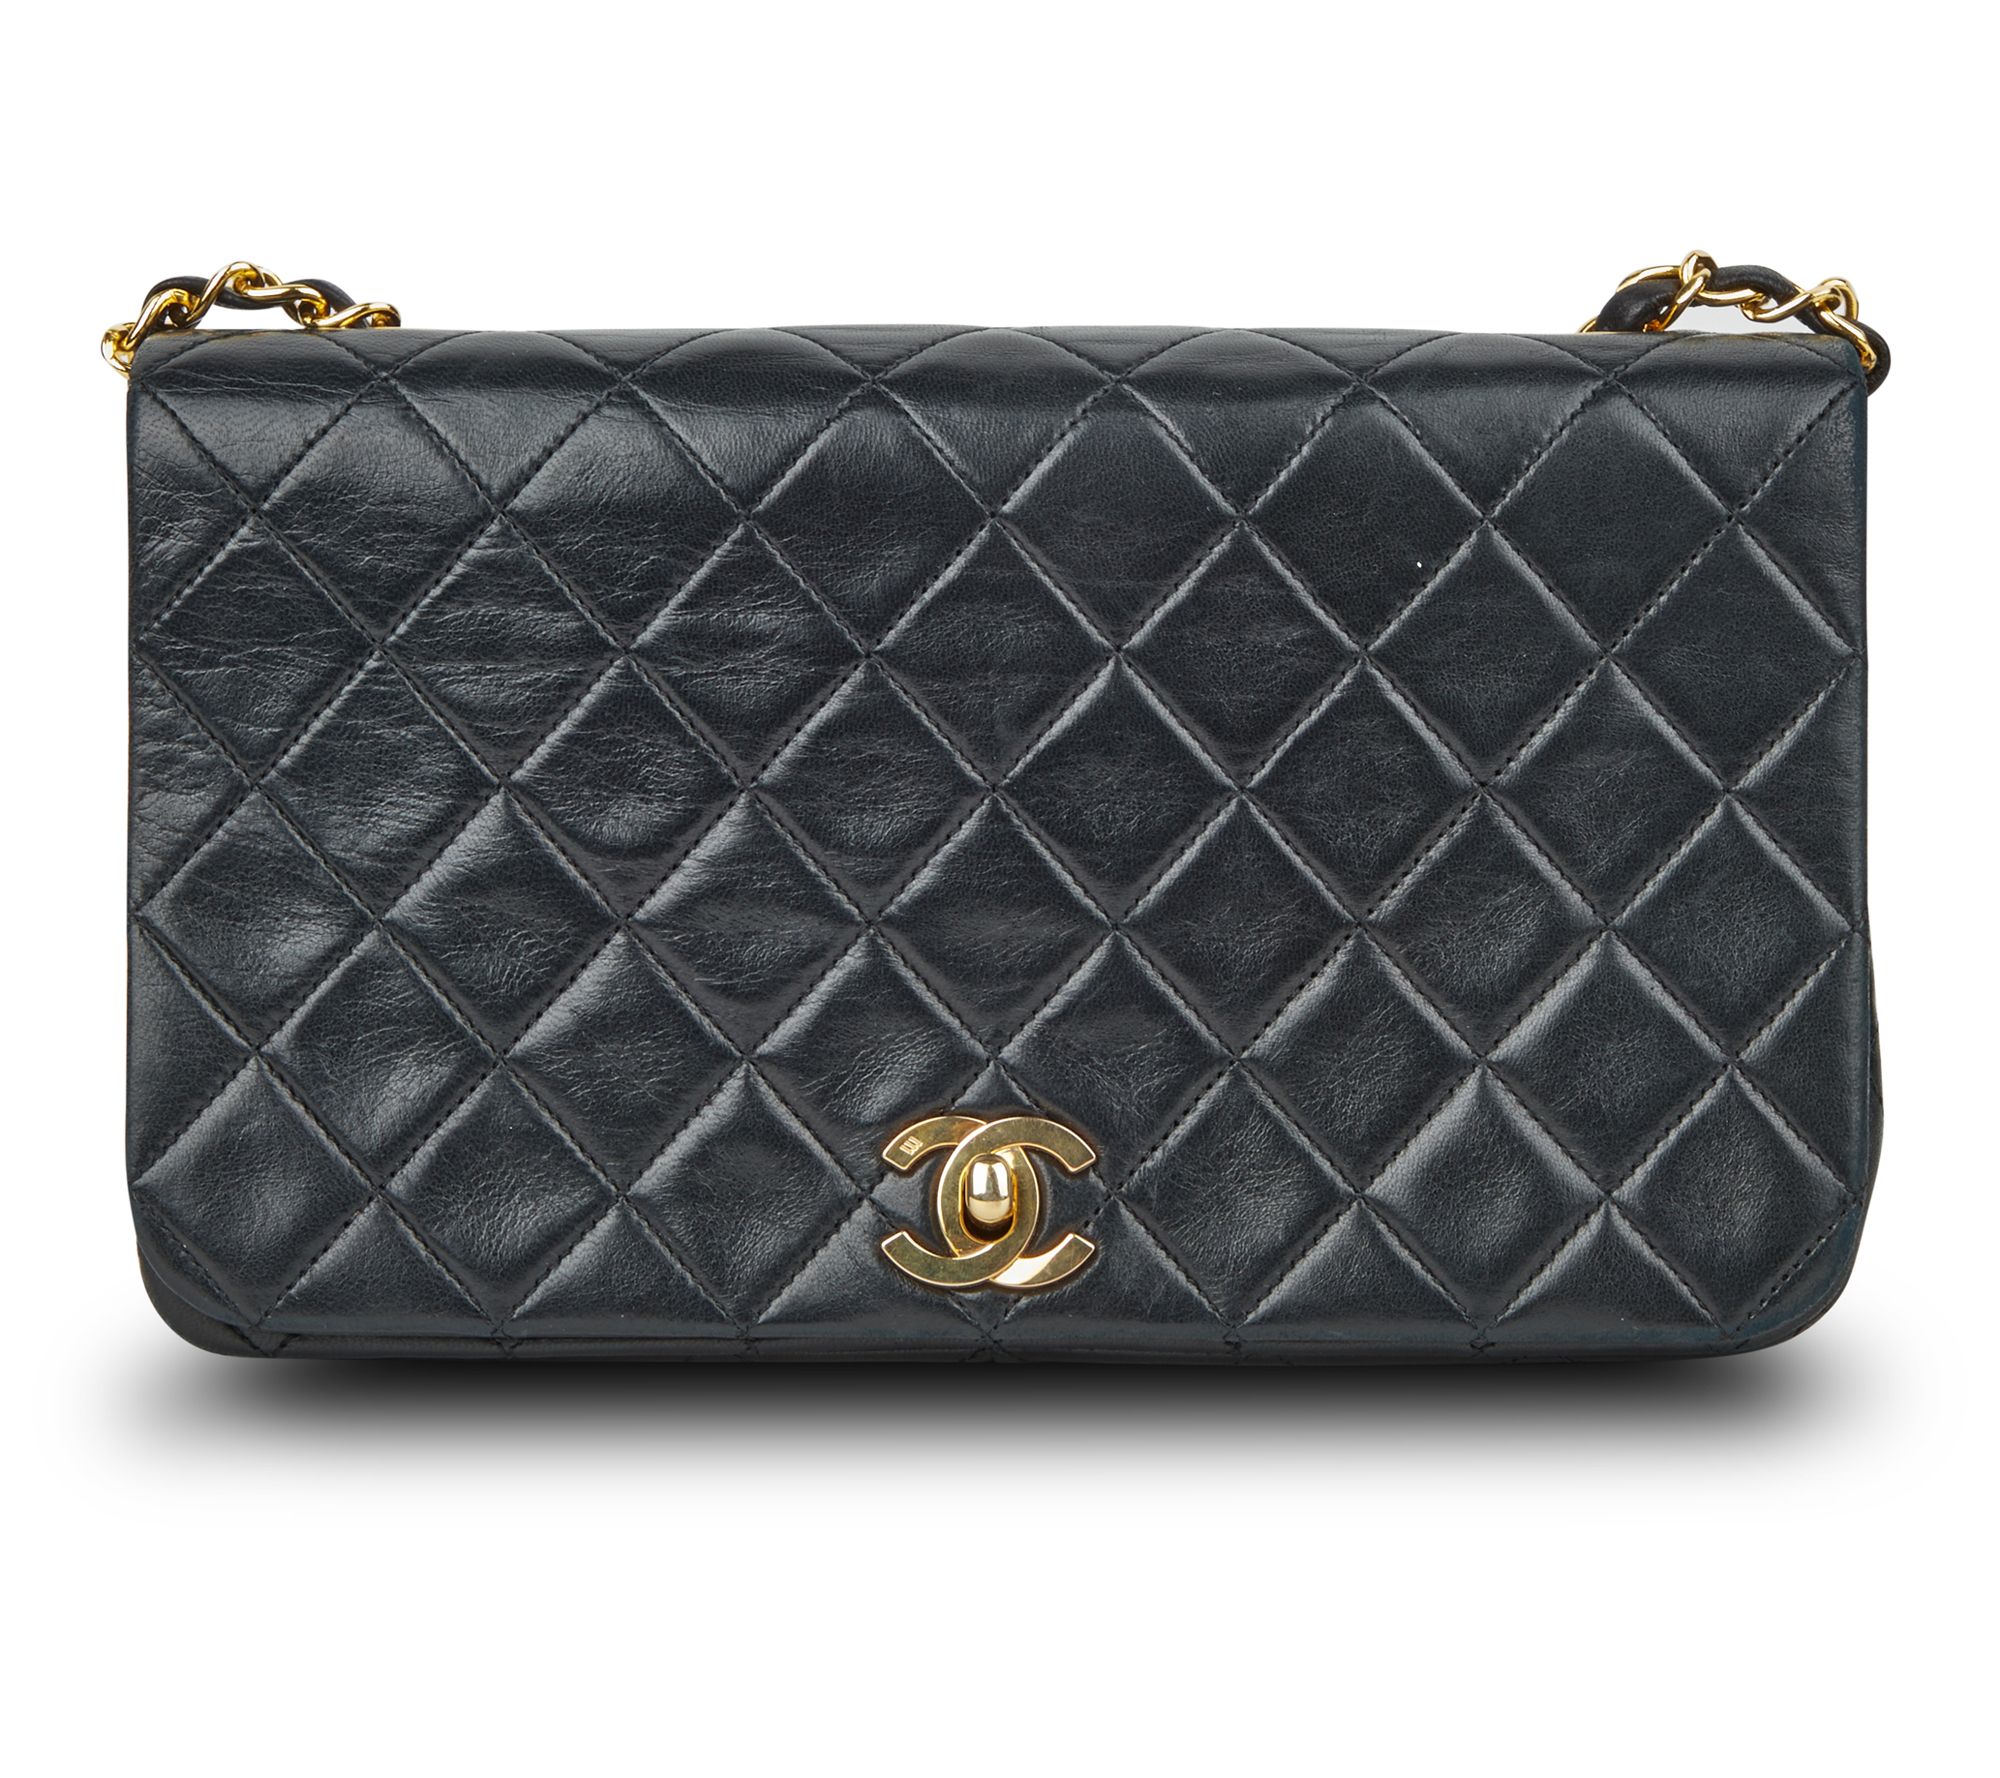 Handbags Chanel Chanel Full Flap Chain Shoulder Bag Black Quilted Lambskin